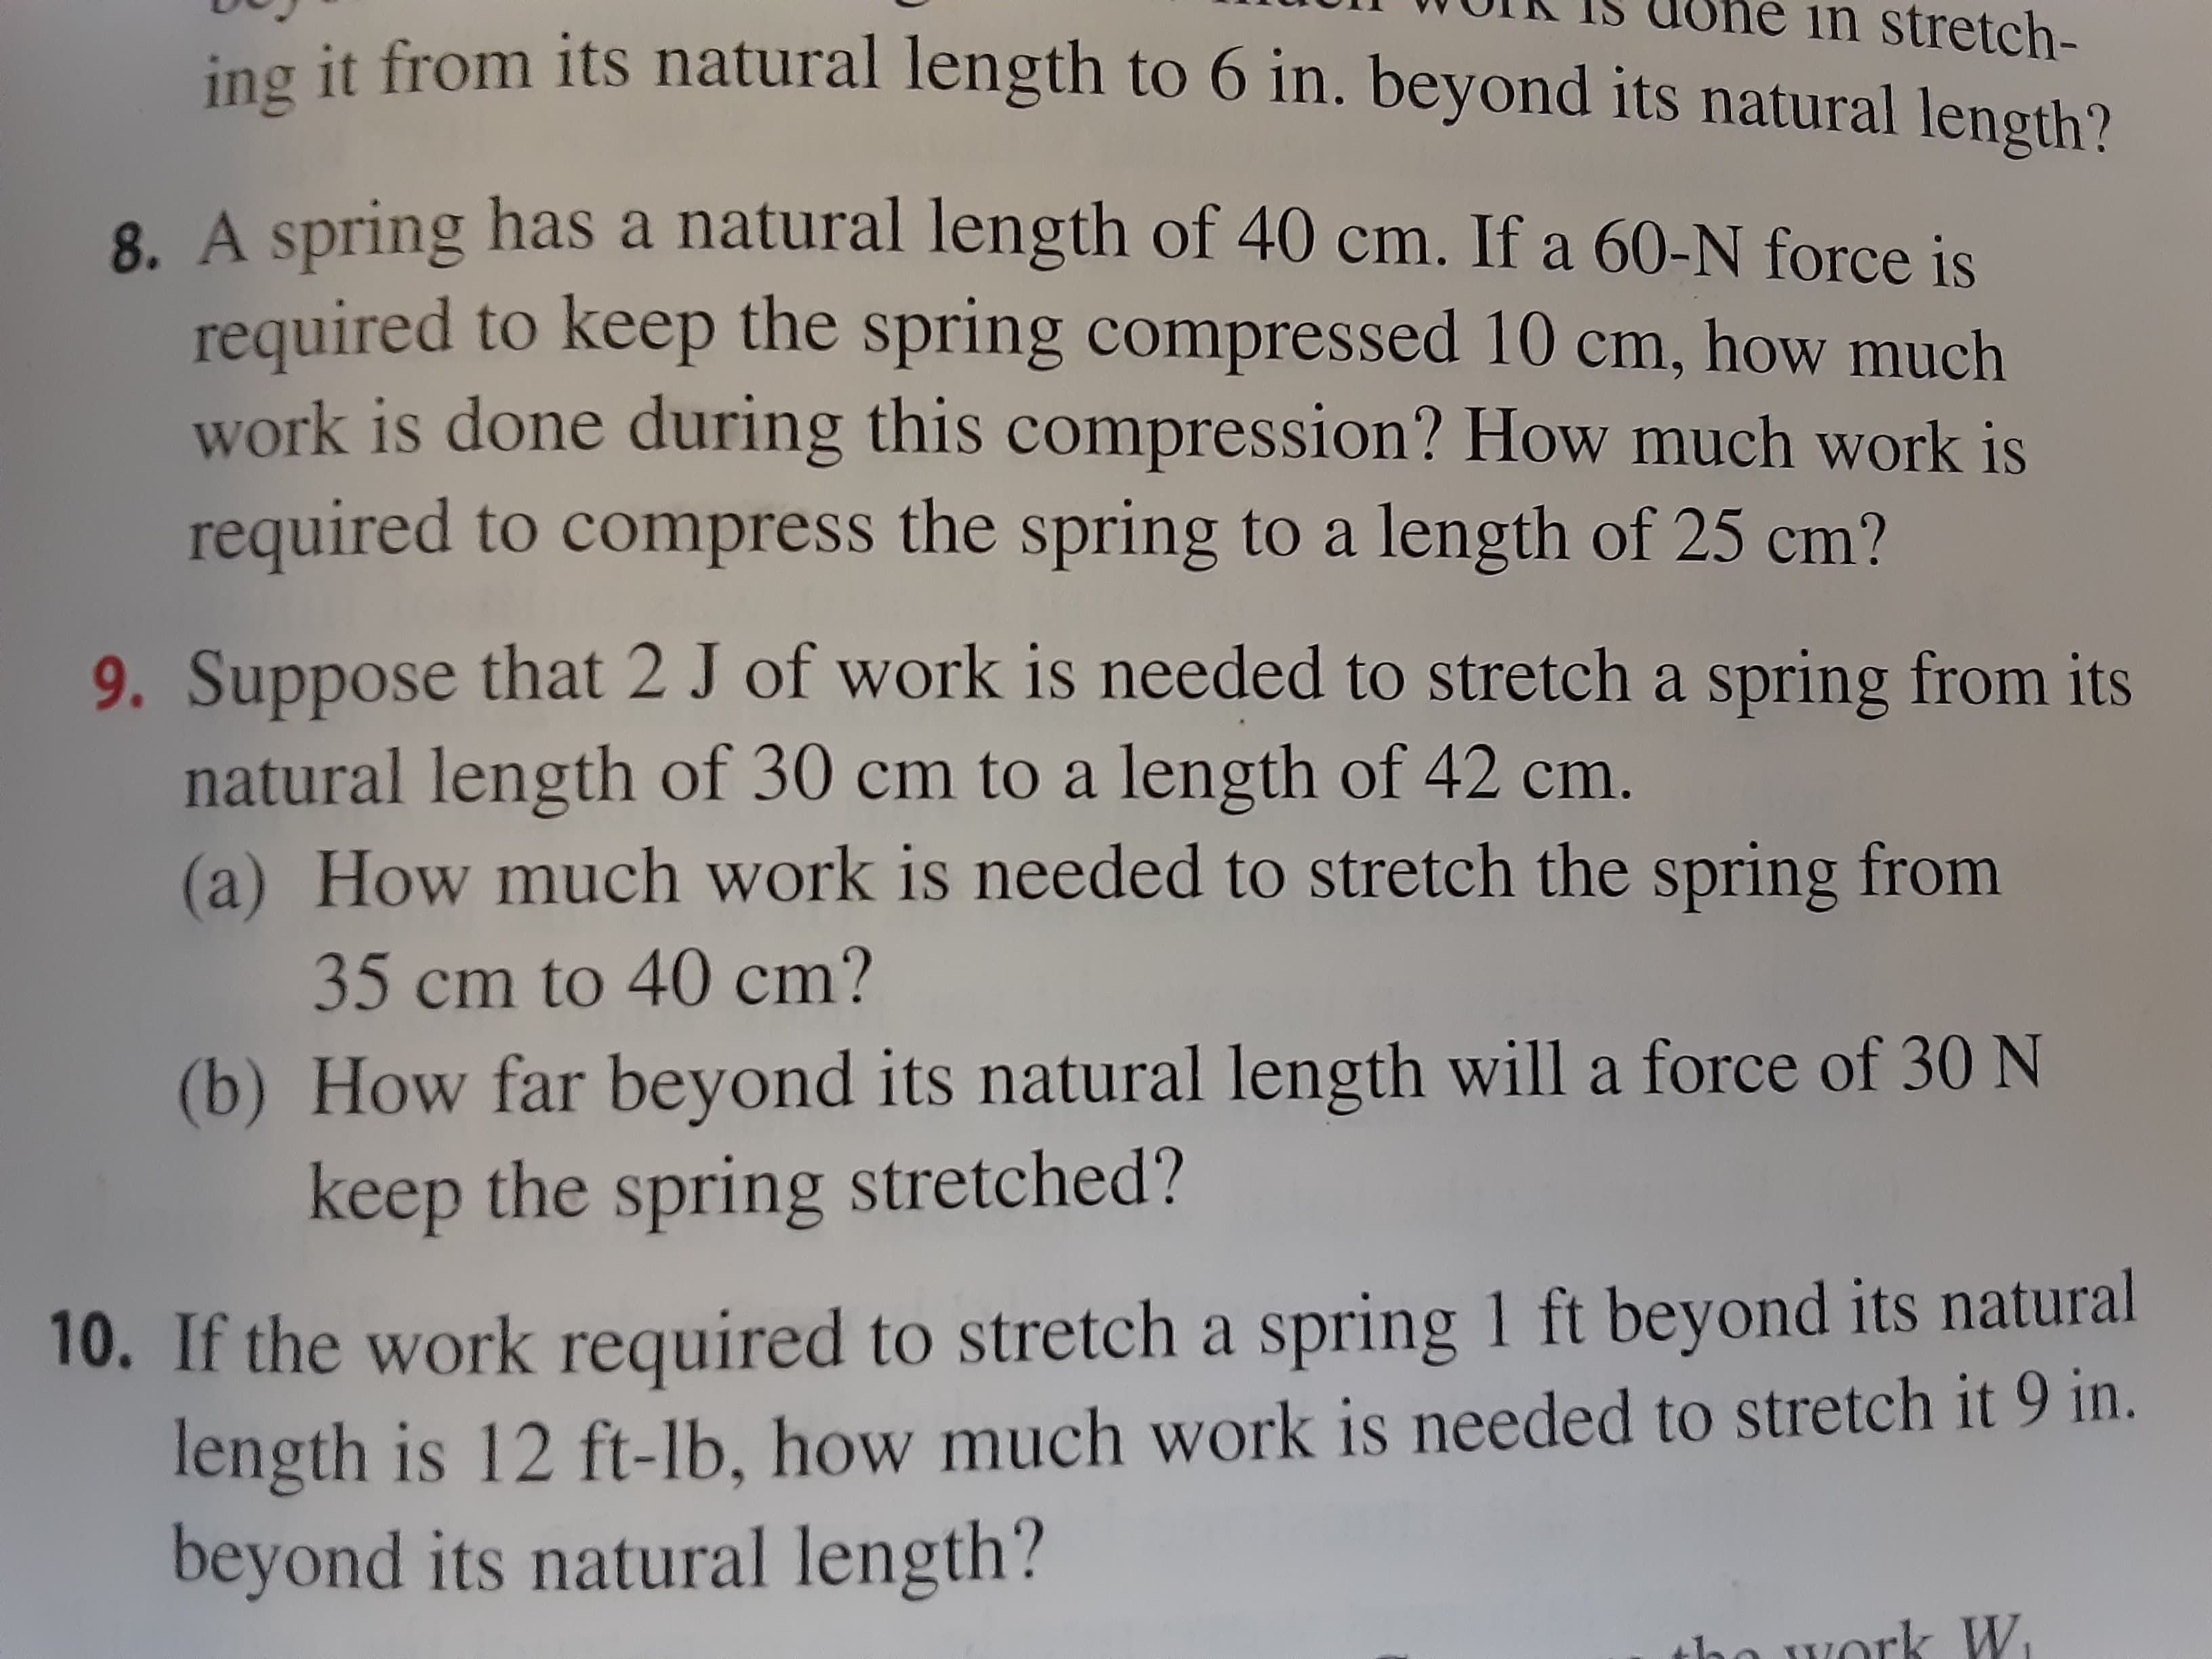 9. Suppose that 2 J of work is needed to stretch a spring from its
natural length of 30 cm to a length of 42 cm.
(a) How much work is needed to stretch the spring from
35 cm to 40 cm?
(b) How far beyond its natural length will a force of 30 N
keep the spring stretched?
